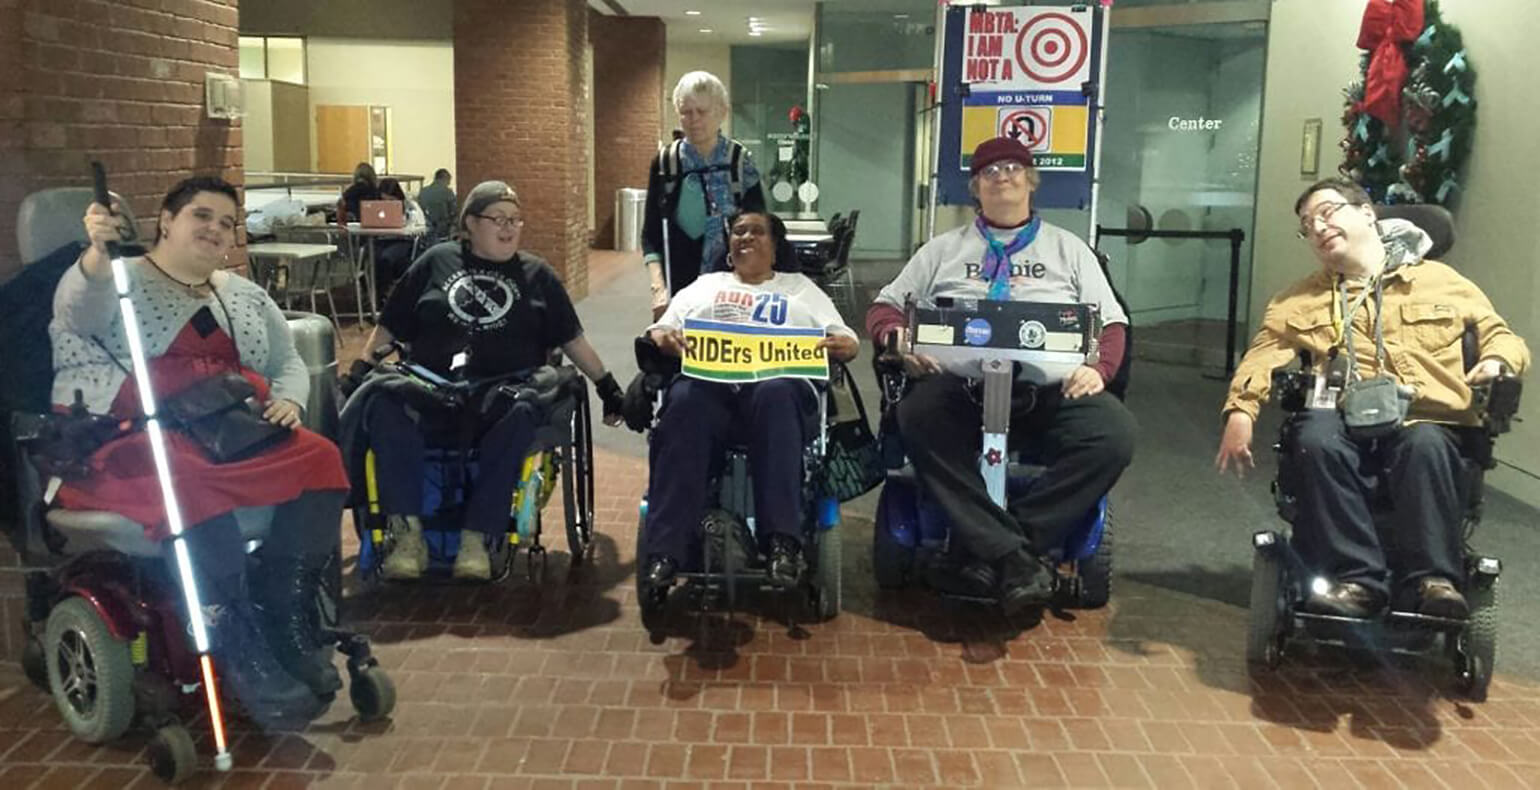 An image of 6 Members of the Boston Center for Independent Living protesting for increased accessibility on Boston public transportation. 5 of them sit in motorized wheelchairs, while 1 stands behind the group. The person in the middle holds a sign that says, 'RIDErs United.'